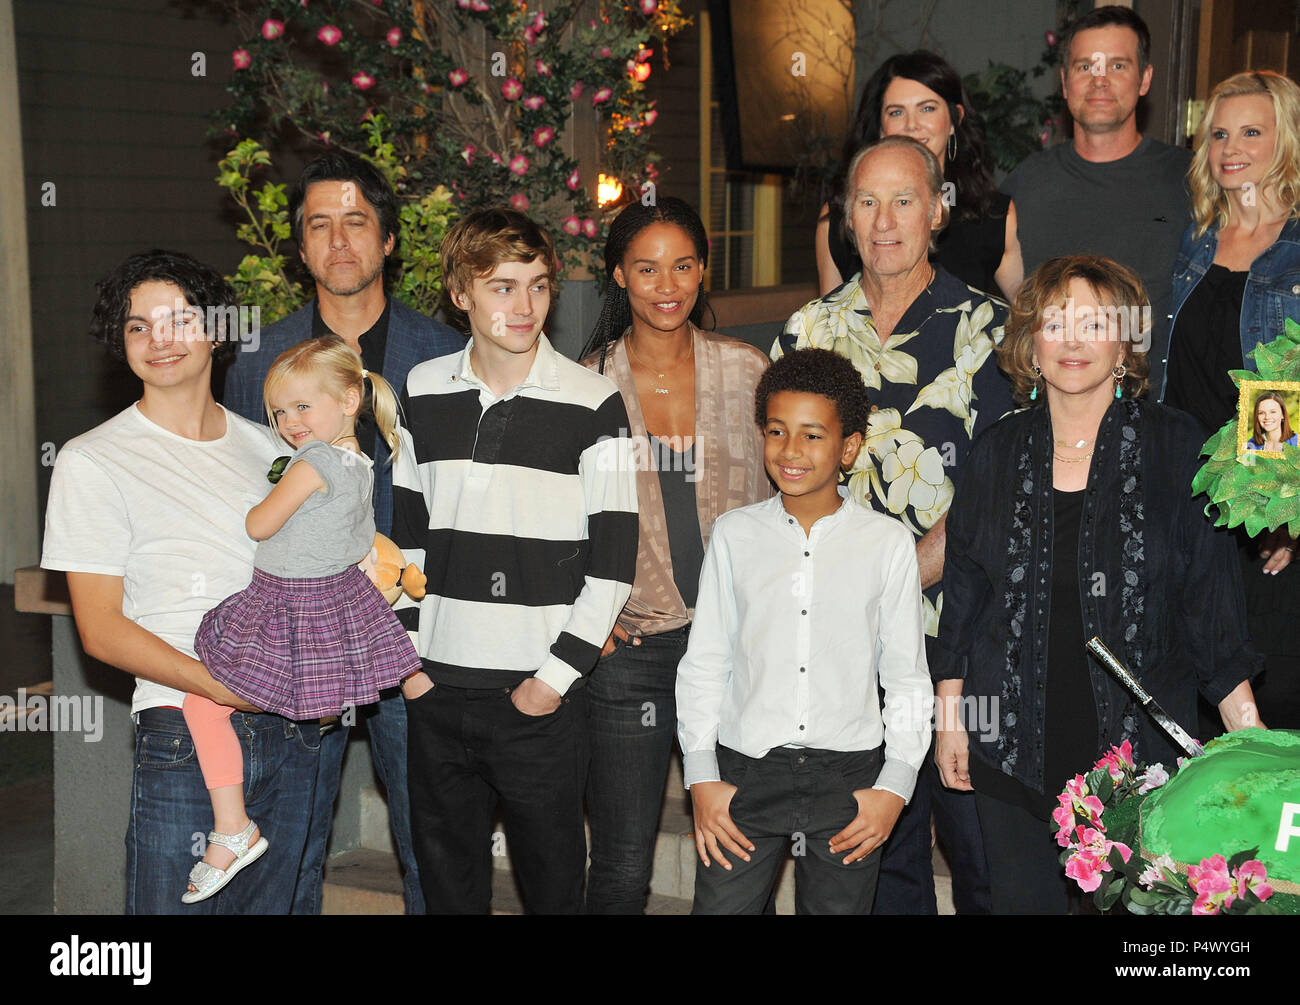 Max Burkholder, Ray Romano, Miles Heizer, Joy Bryant, Tyree Brown, Craig T. Nelson, Bonnie Bedelia, Lauren Graham, Peter Krause,   at ParentHood 100th Episode at the Universal Lot Stage 43 on Nov. 7, 2014 in Los Angeles.Max Burkholder, Ray Romano, Miles Heizer, Joy Bryant, Tyree Brown, Craig T. Nelson, Bonnie Bedelia, Lauren Graham, Peter Krause, Monica Potter, Sam Jaeger, Erika Christensen,  Savannah Paige Rae, 166  Event in Hollywood Life - California, Red Carpet Event, USA, Film Industry, Celebrities, Photography, Bestof, Arts Culture and Entertainment, Topix Celebrities fashion, Best of, H Stock Photo